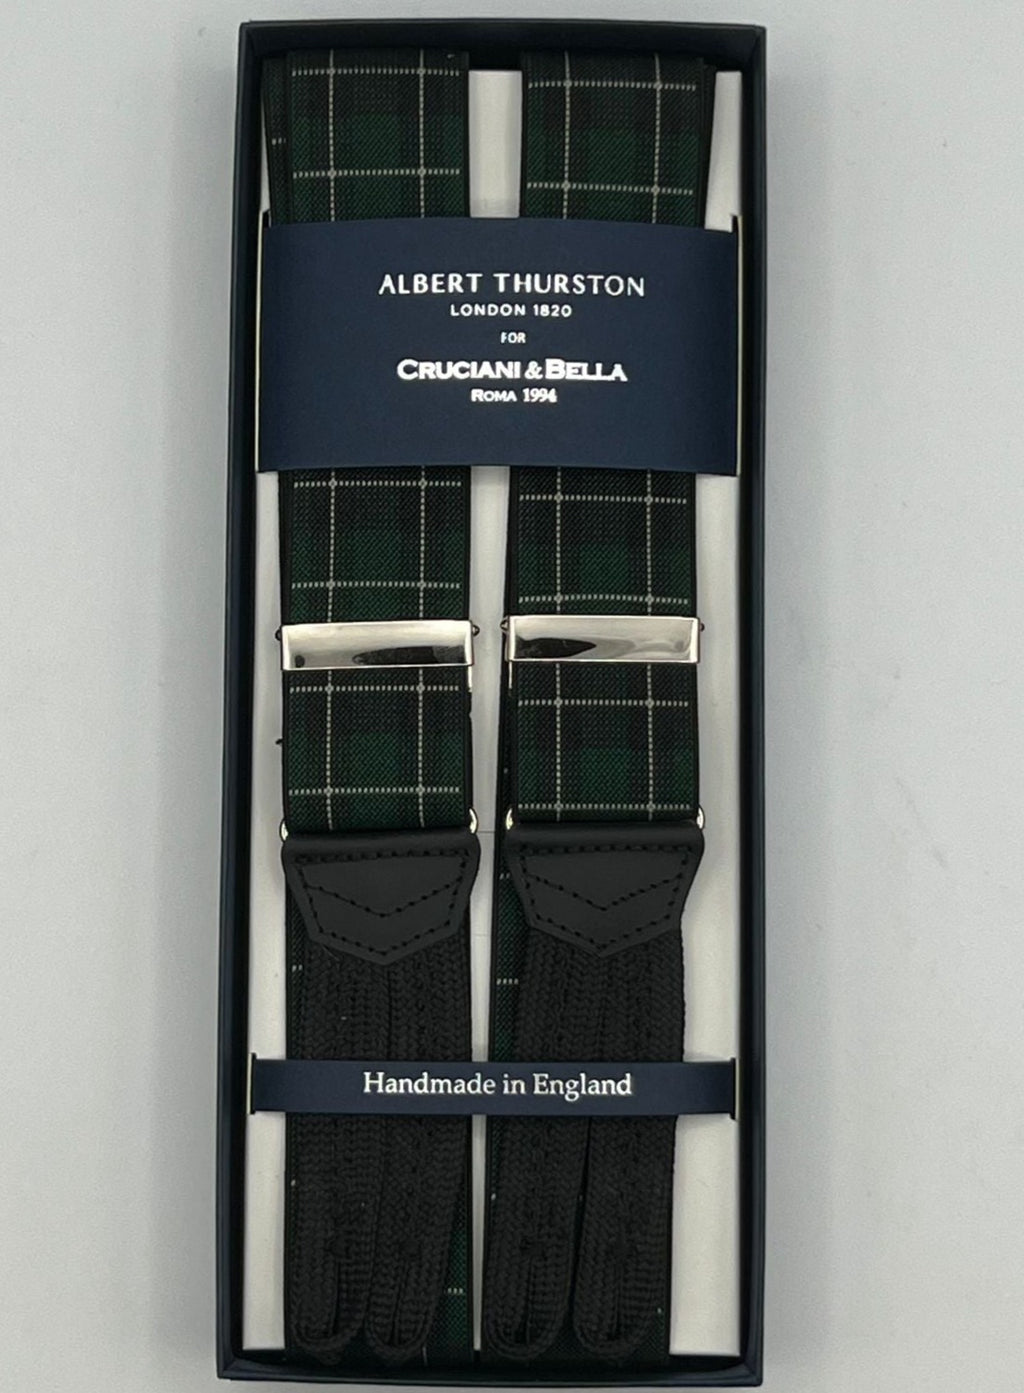 Albert Thurston for Cruciani & Bella Made in England Adjustable Sizing 35 mm Elastic Braces Green, Black and Off White Tartan Braces Braid ends Y-Shaped Nickel Fittings Size: XL